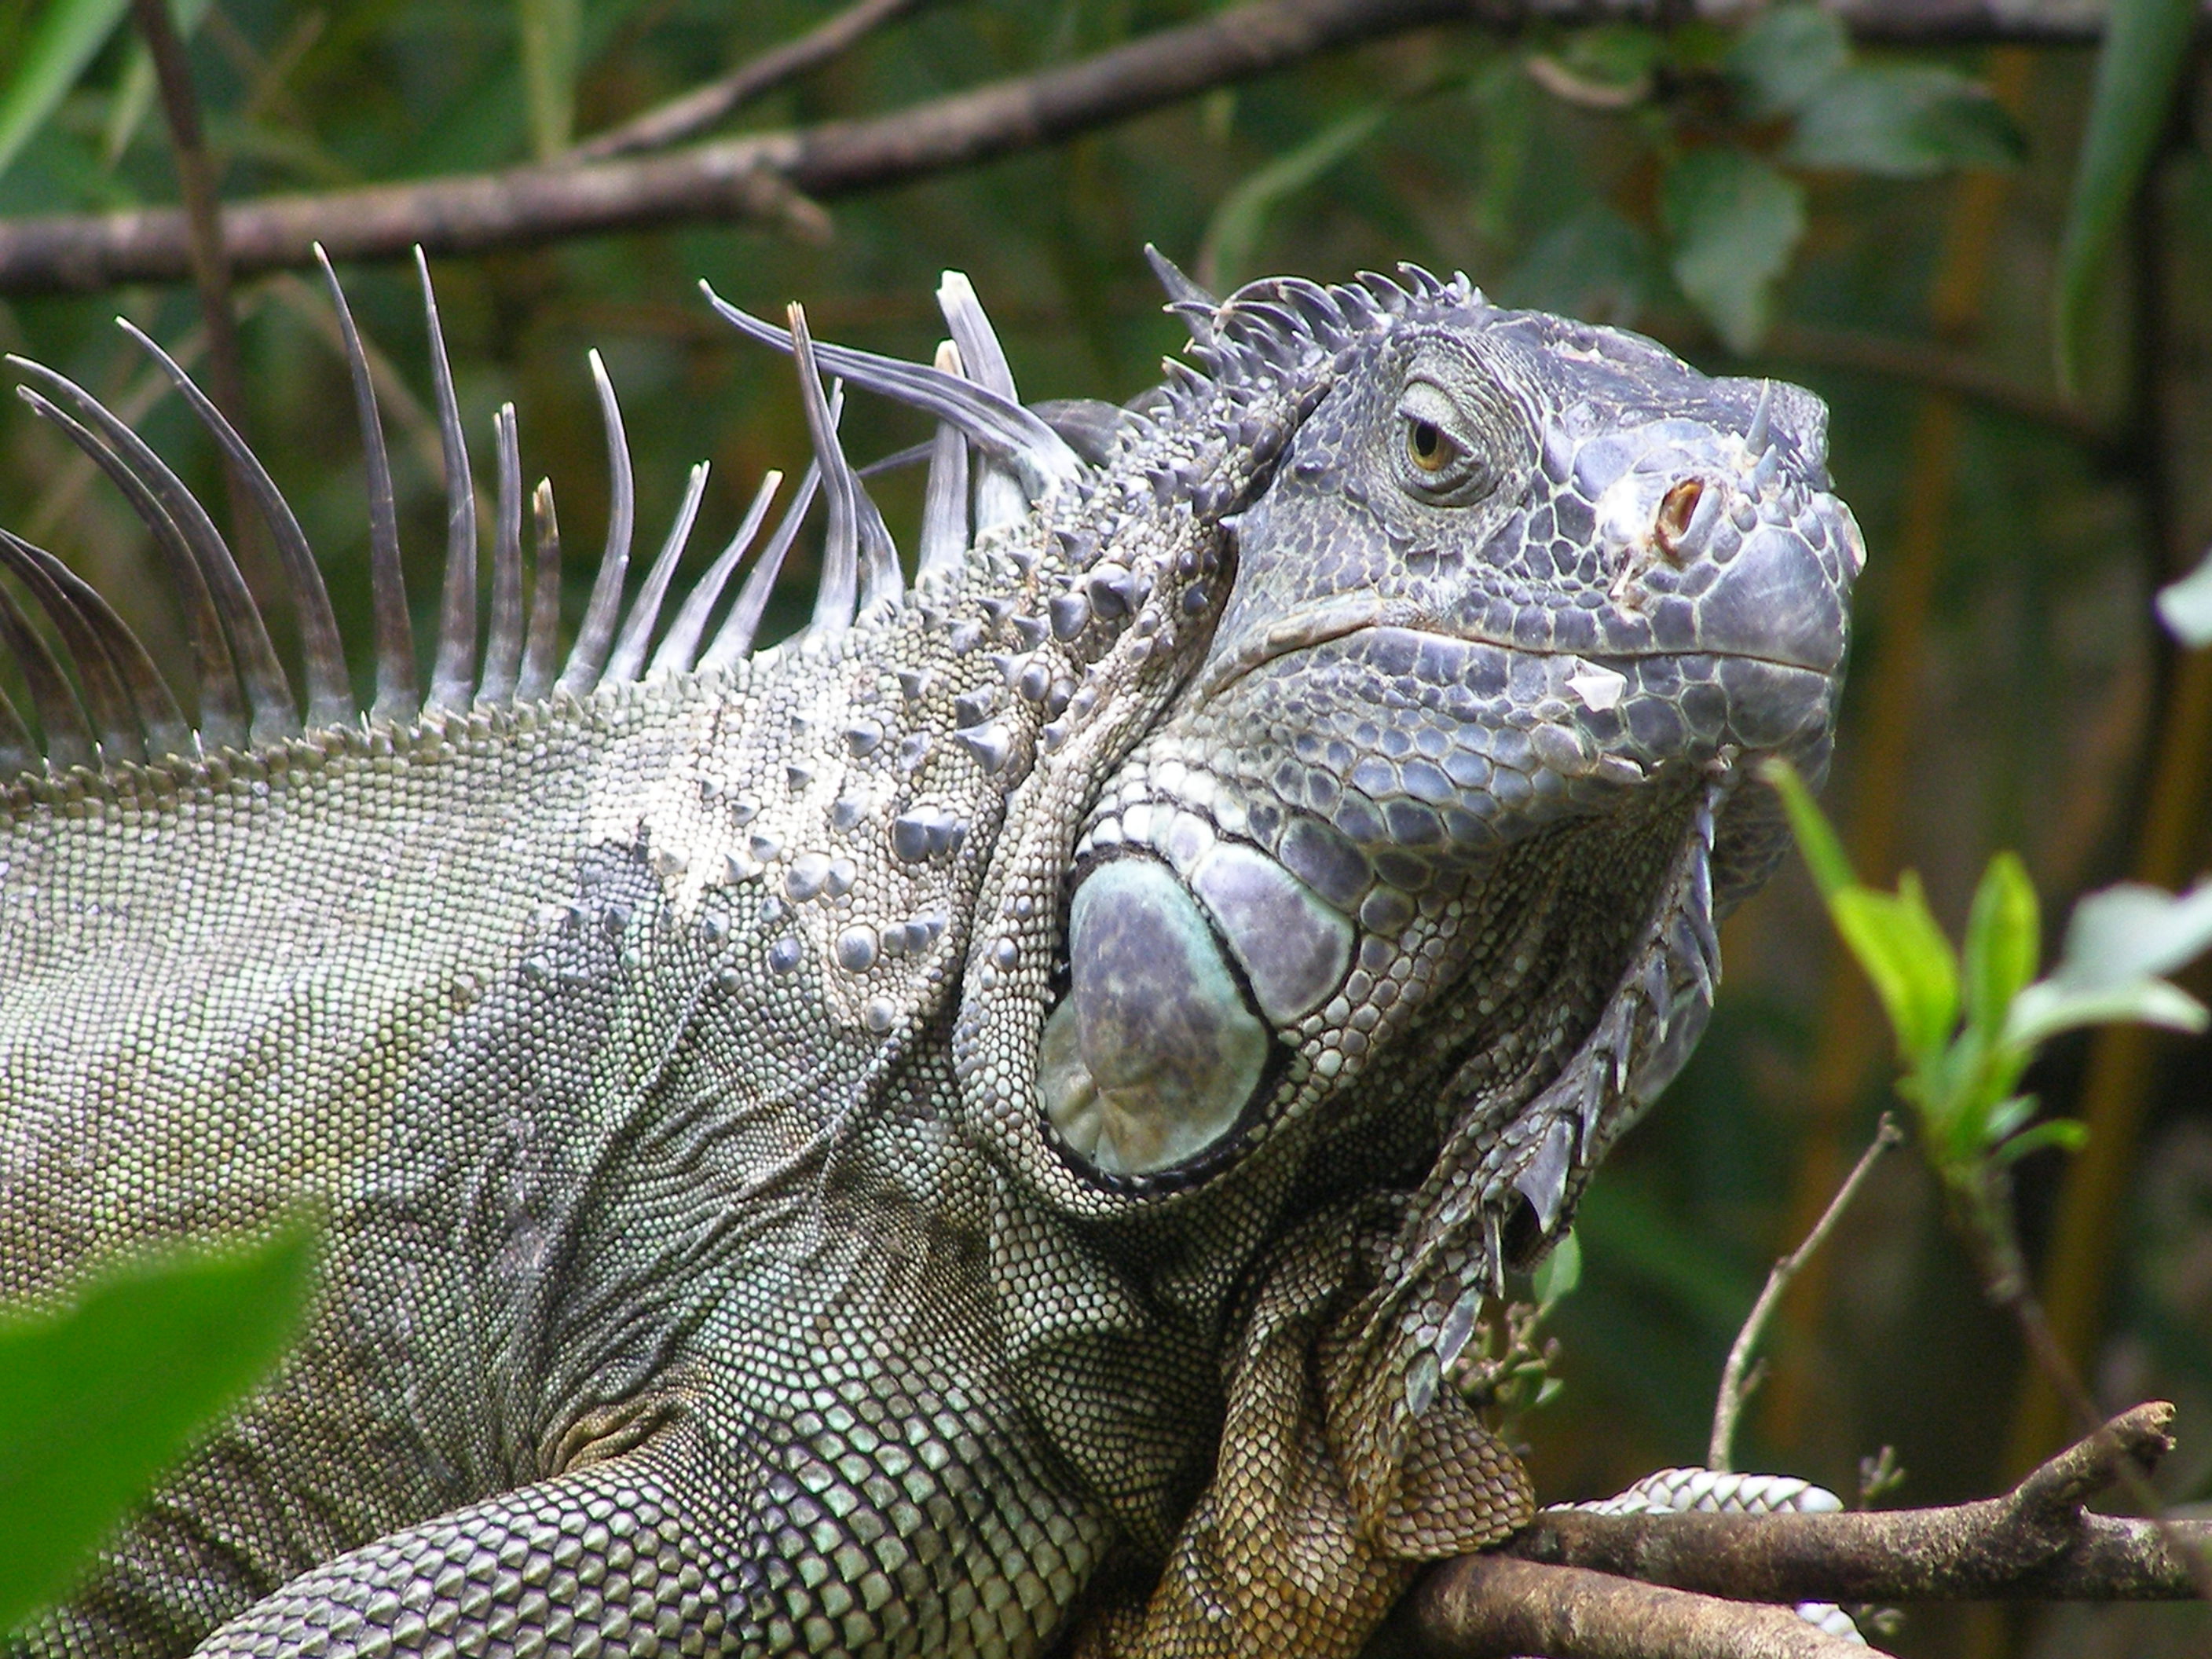 Click picture to see more Green Iguana photos.